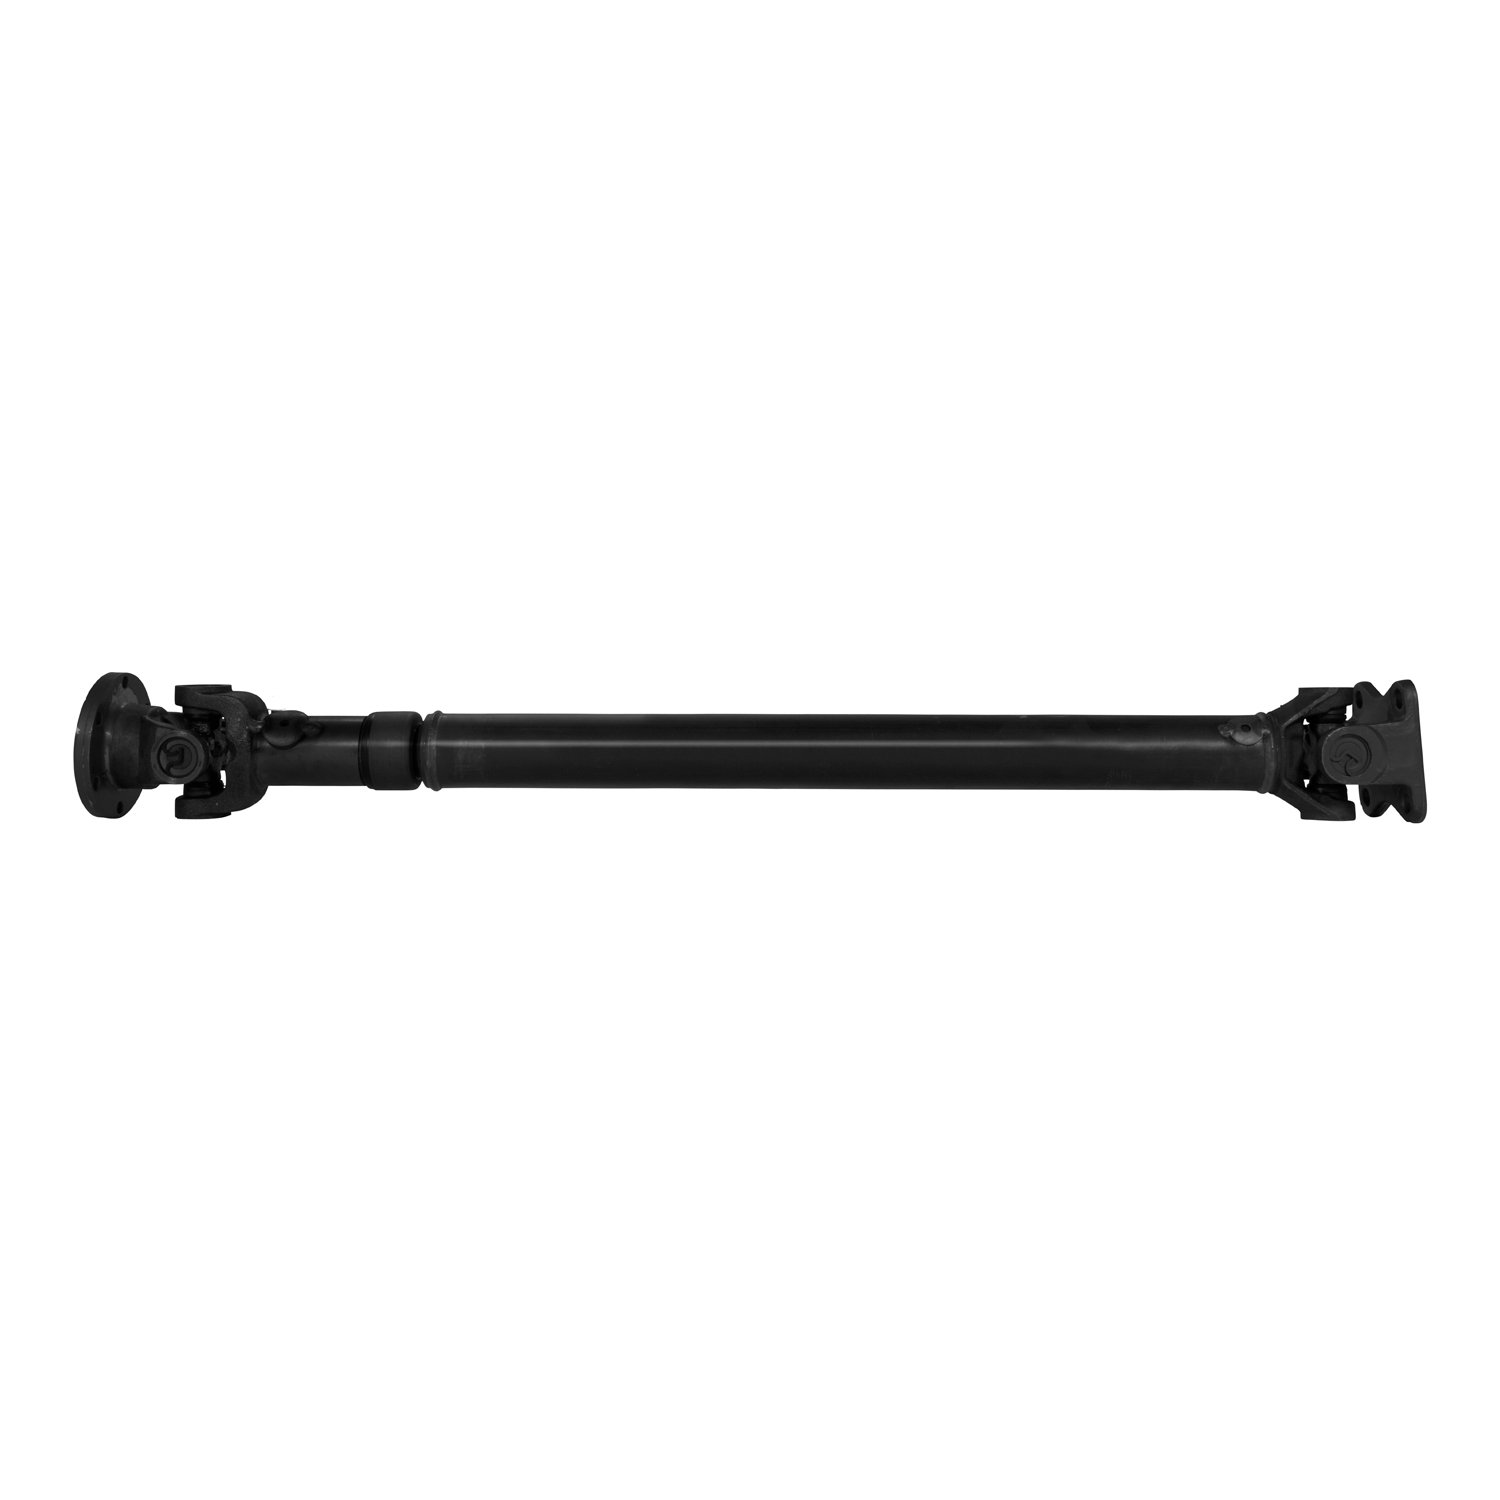 USA Standard 44616 Front Driveshaft, For Grand Cherokee, 34-1/4 in. Flange To Flange